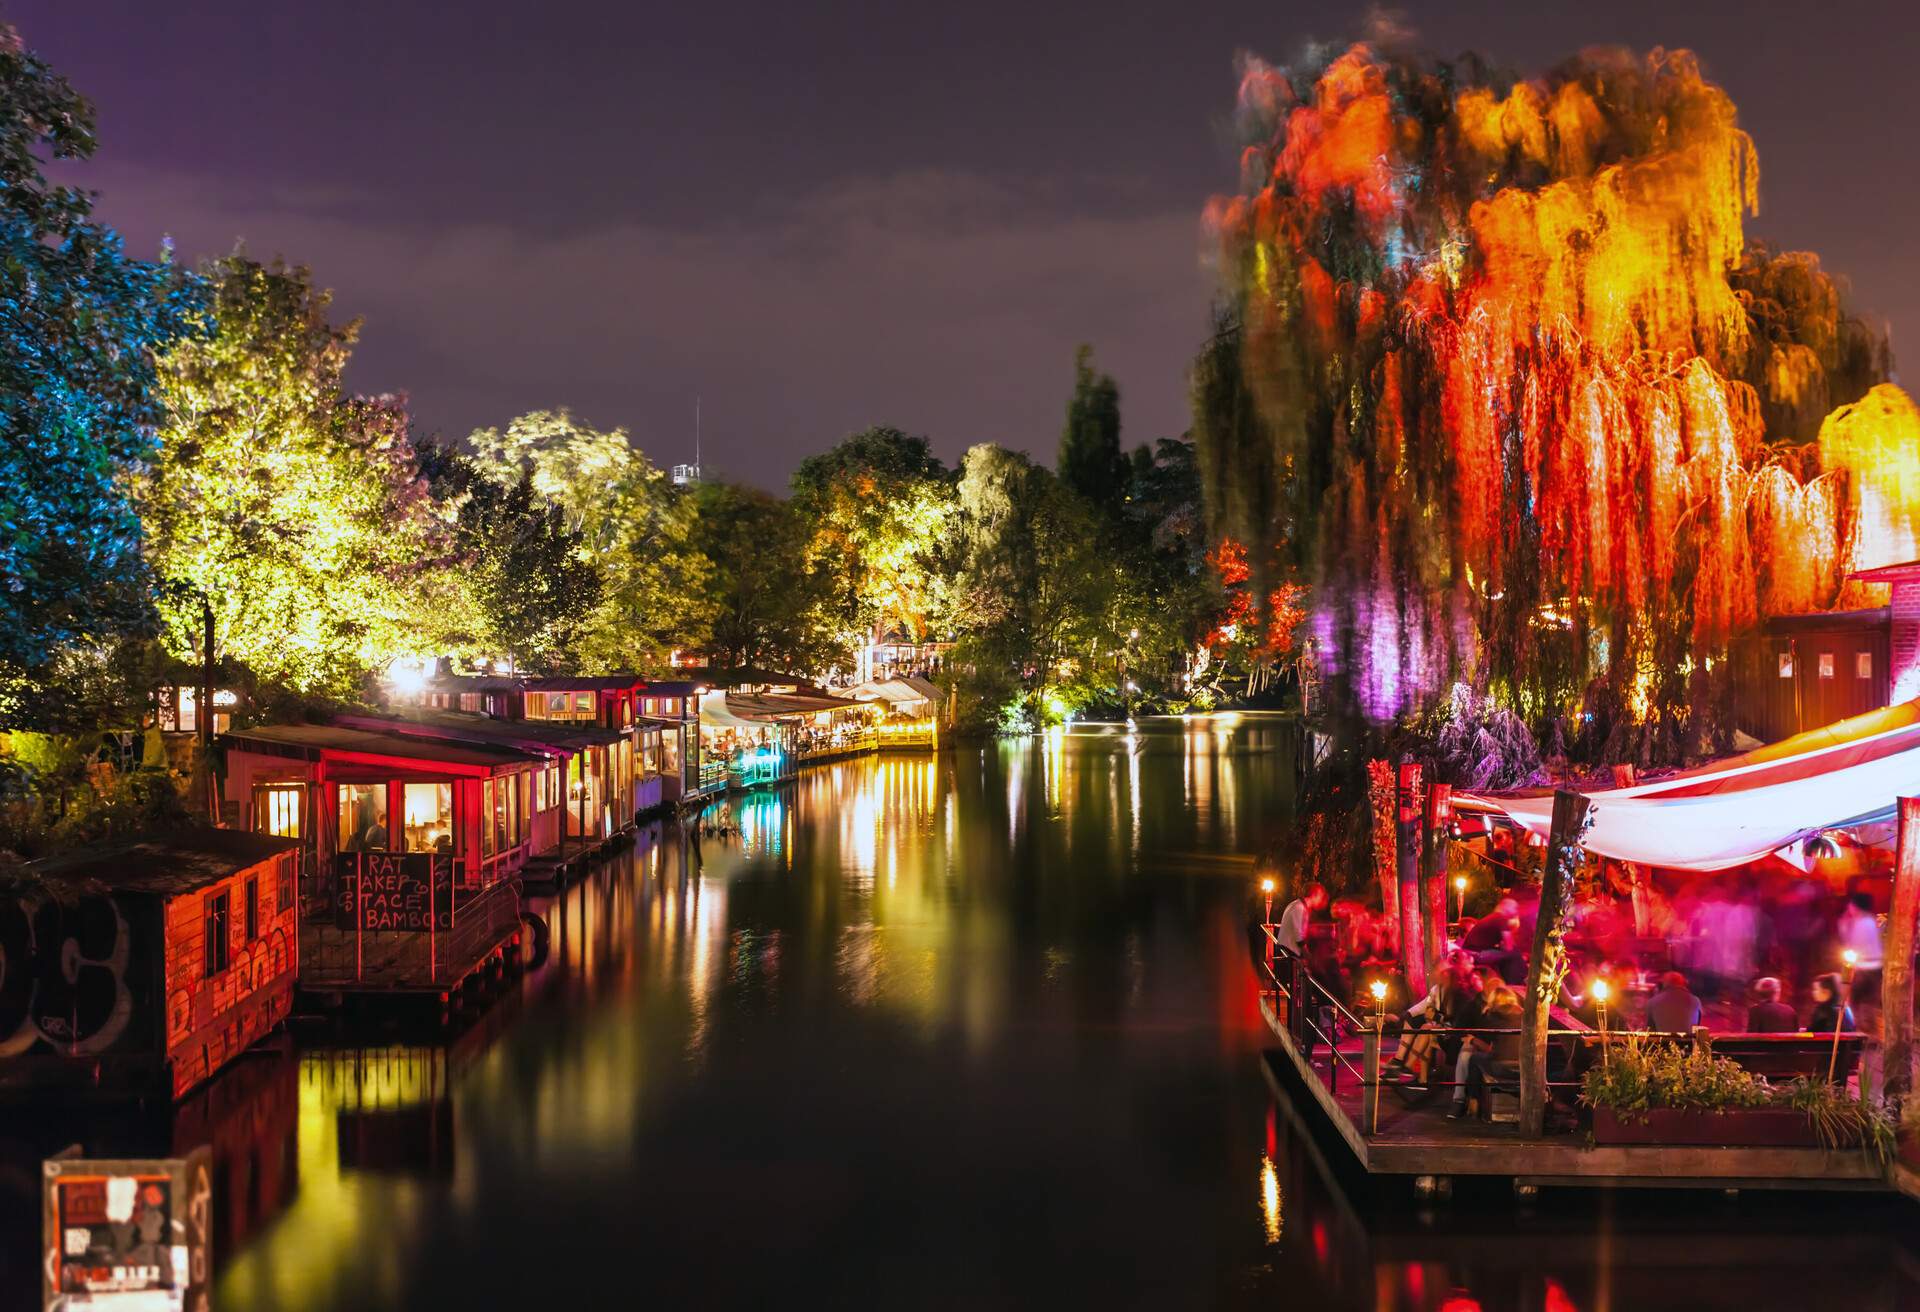 A night-time view of a calm river bordered by commercial establishments, colourful illuminated trees, and a crowded riverside bar with a terrace.